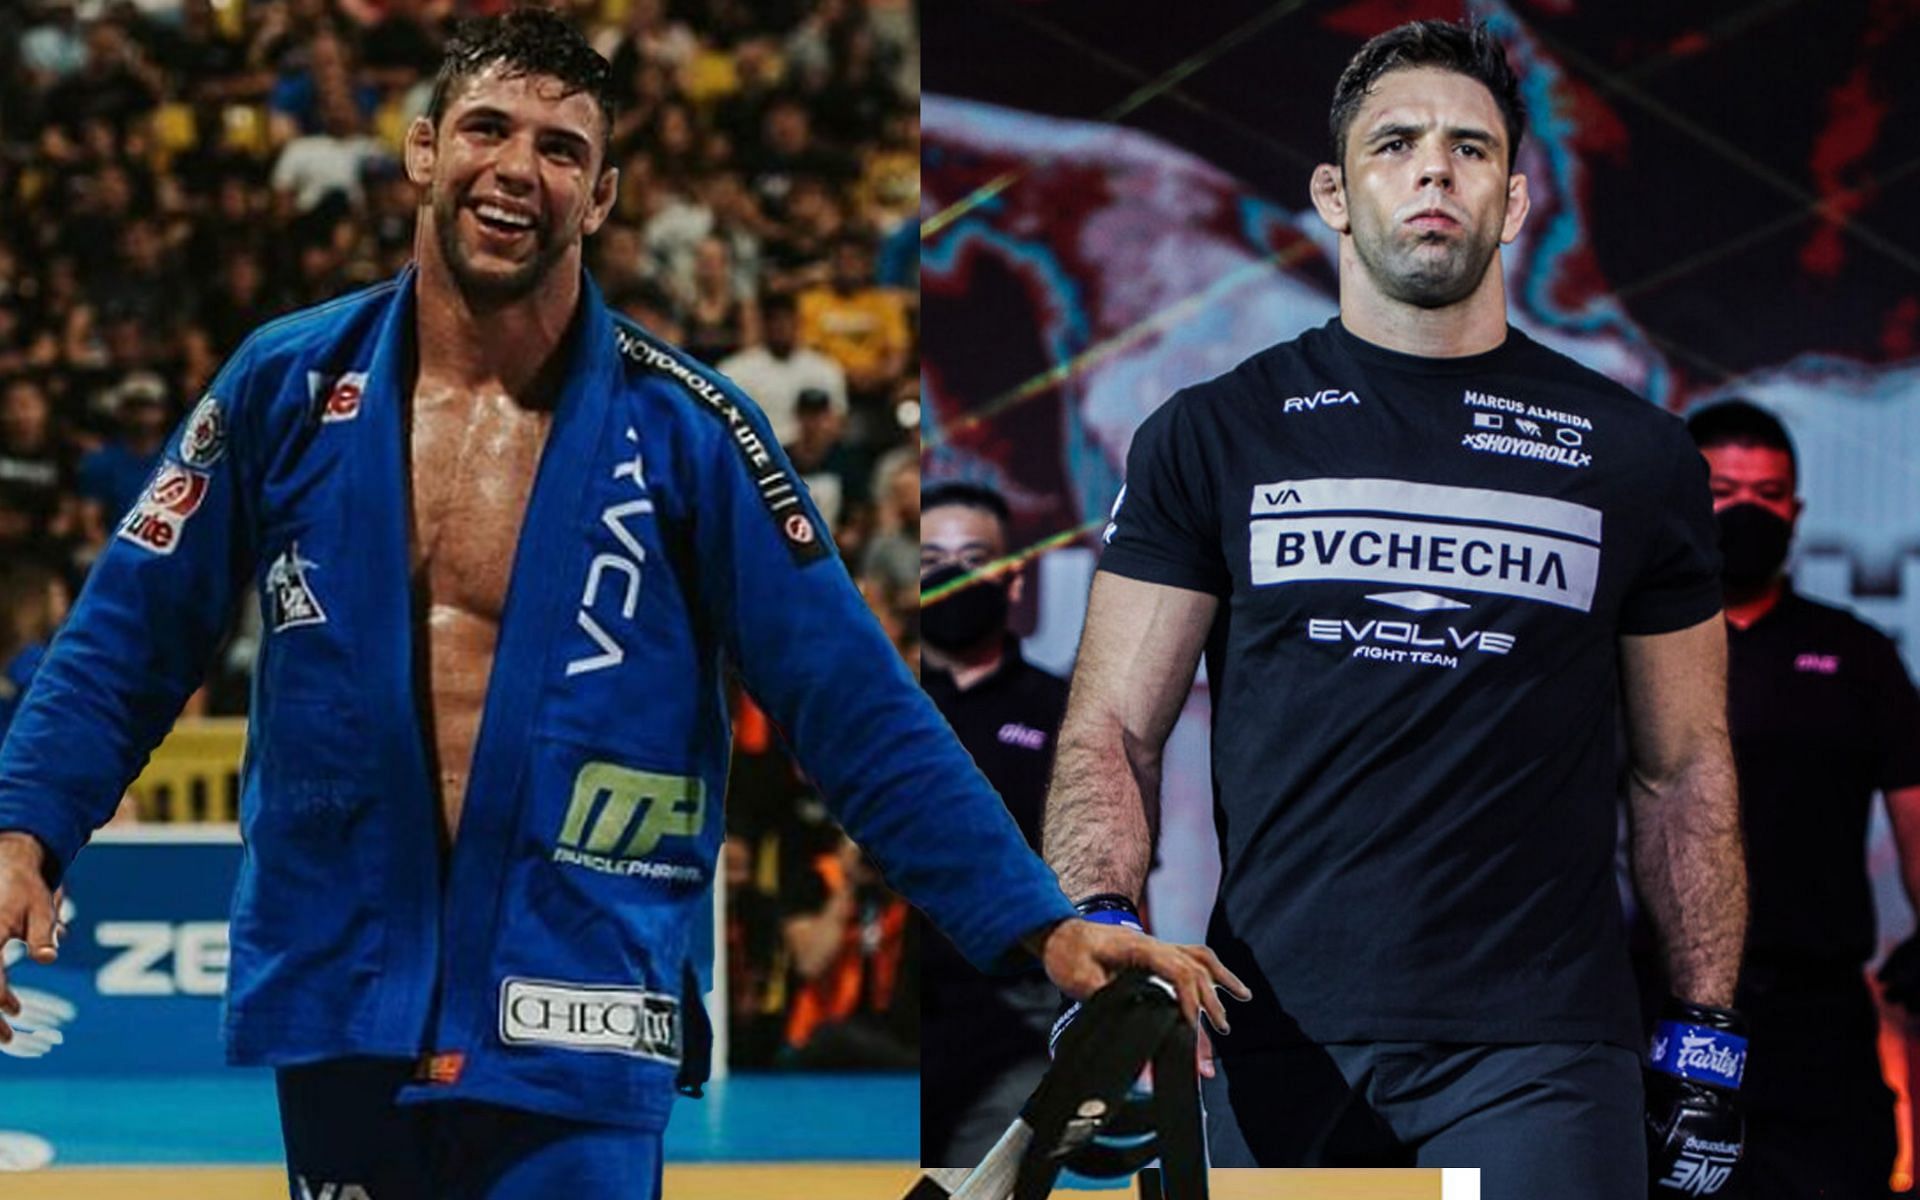 Marcus Almeida has done a lot in grappling (L) and is starting a similar rise in MMA (R). | [Photos: ONE Championship/@marcusbuchecha on Instagram]